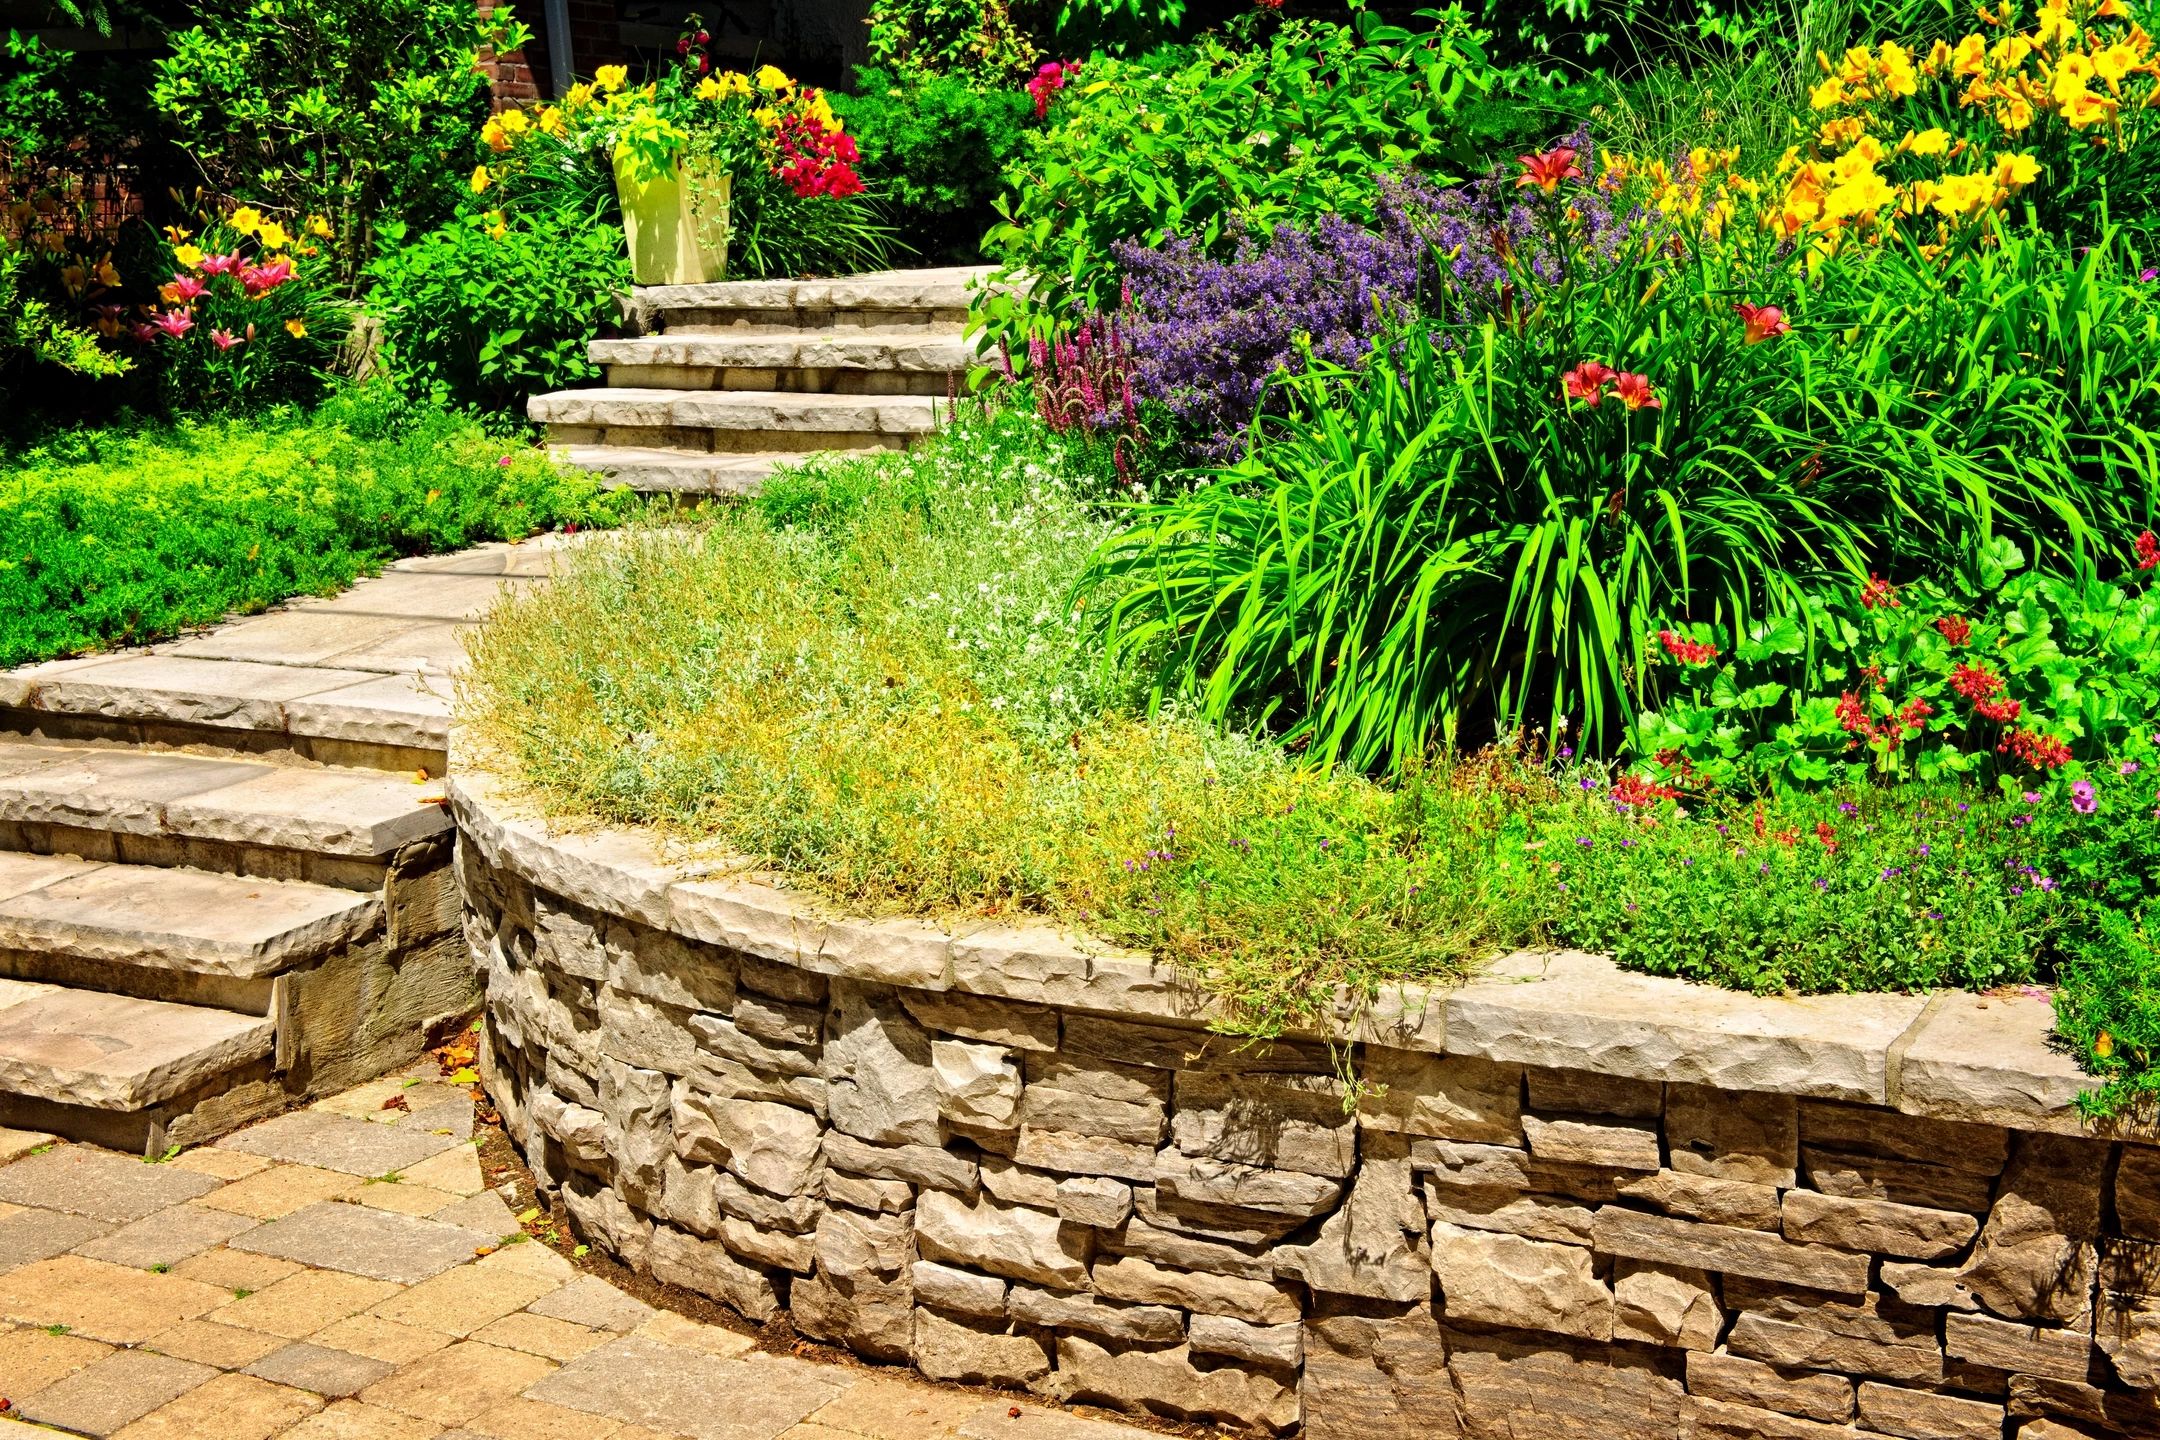 Lawn care Prospect, CT
Landscaping Prospect, CT